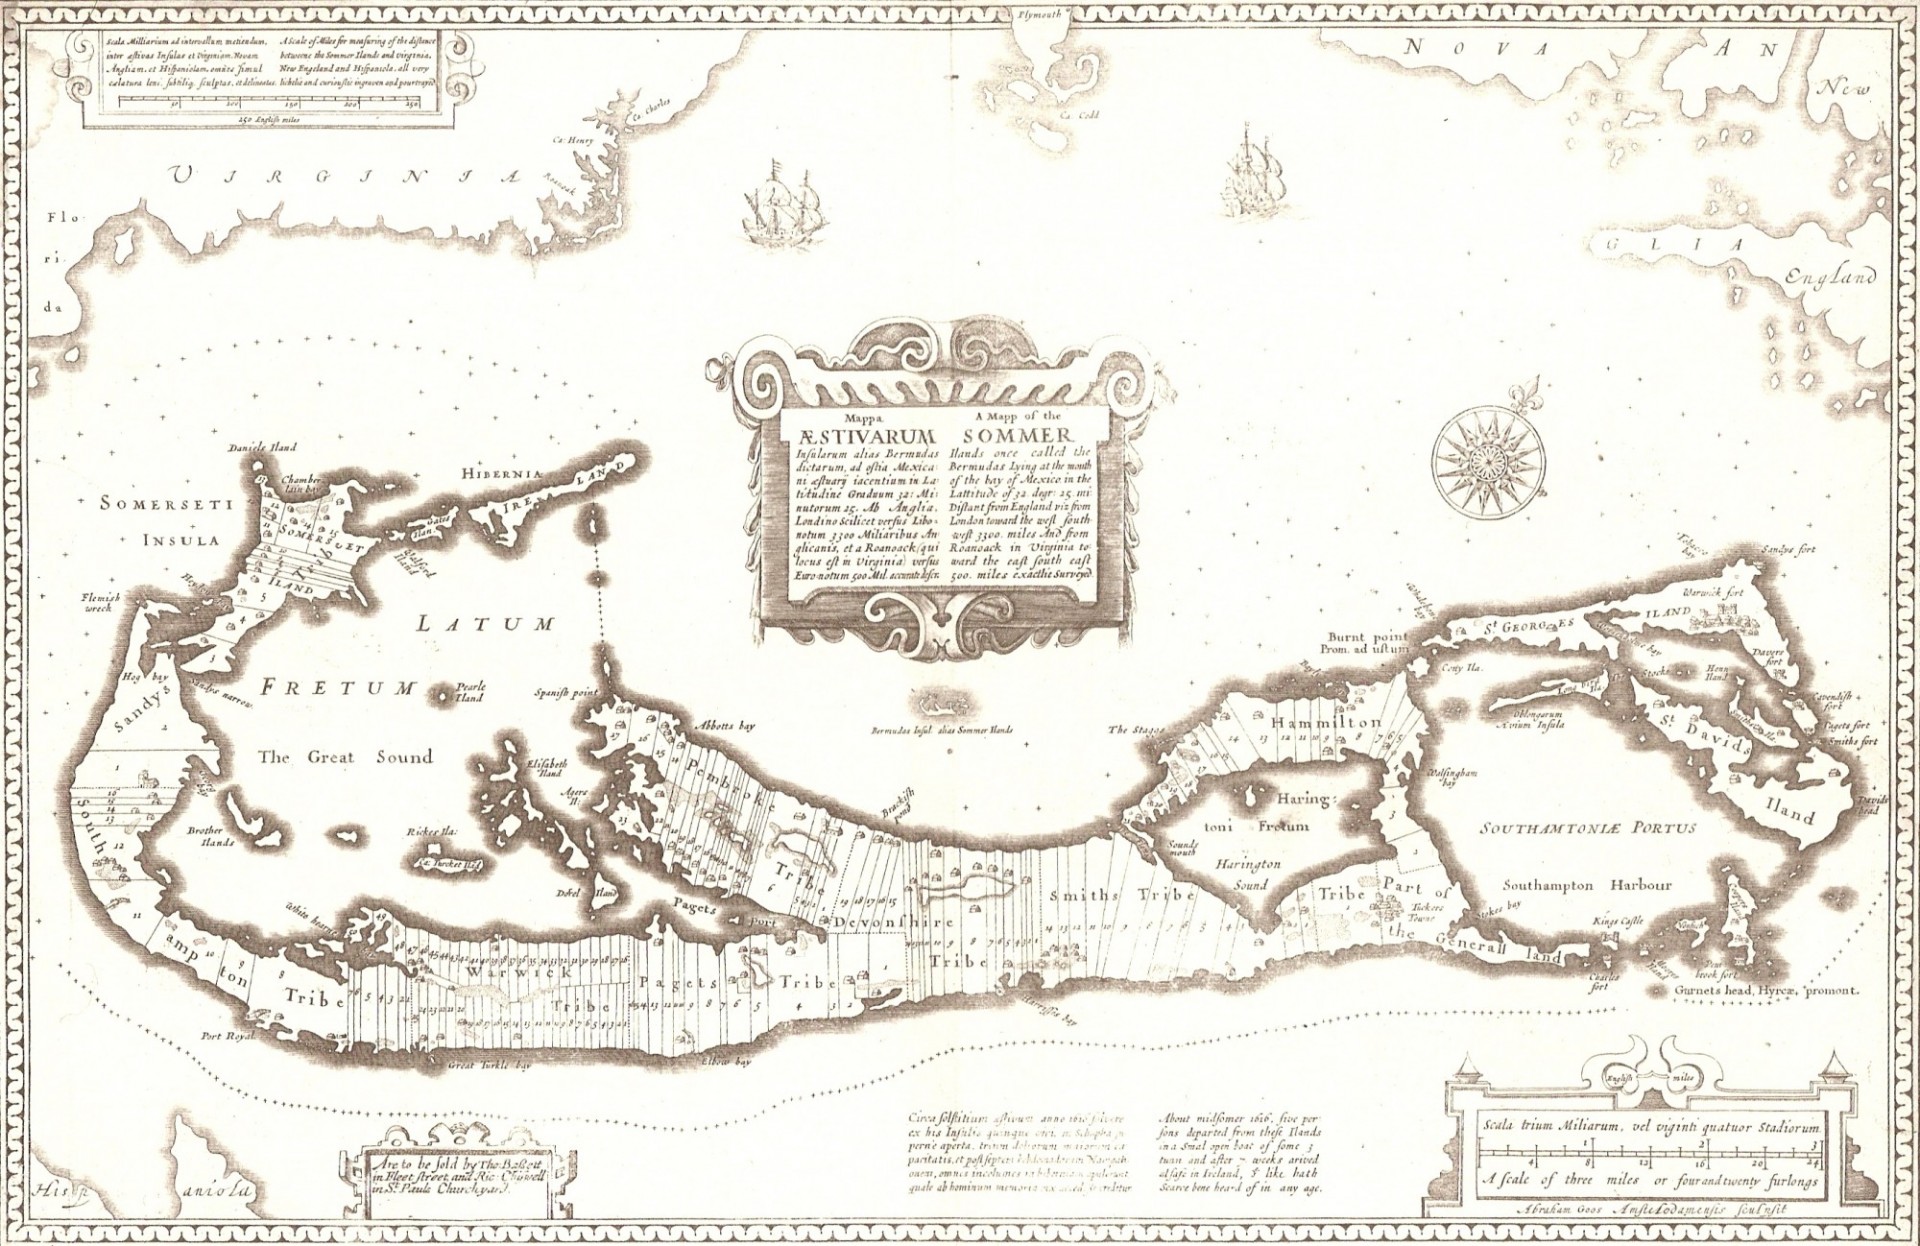 A 1676 map of the Somers Isles (alias Bermuda), by John Speed. Source: Wikimedia Commons, Public domain.